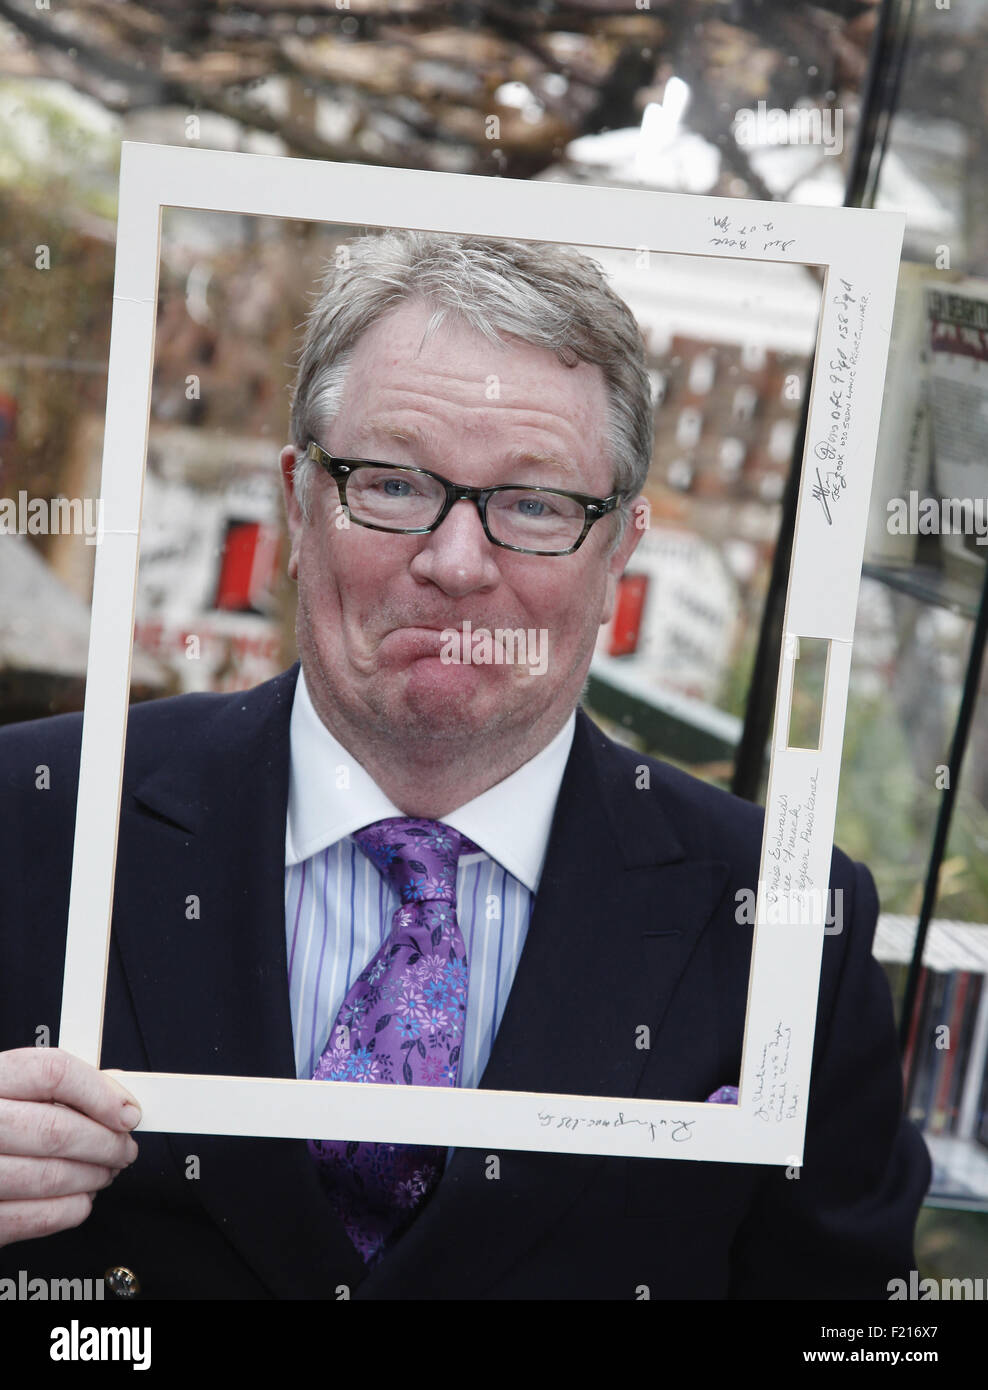 People, Famous, Celebrity, Jim Davidson entertainer and comedian. Stock Photo